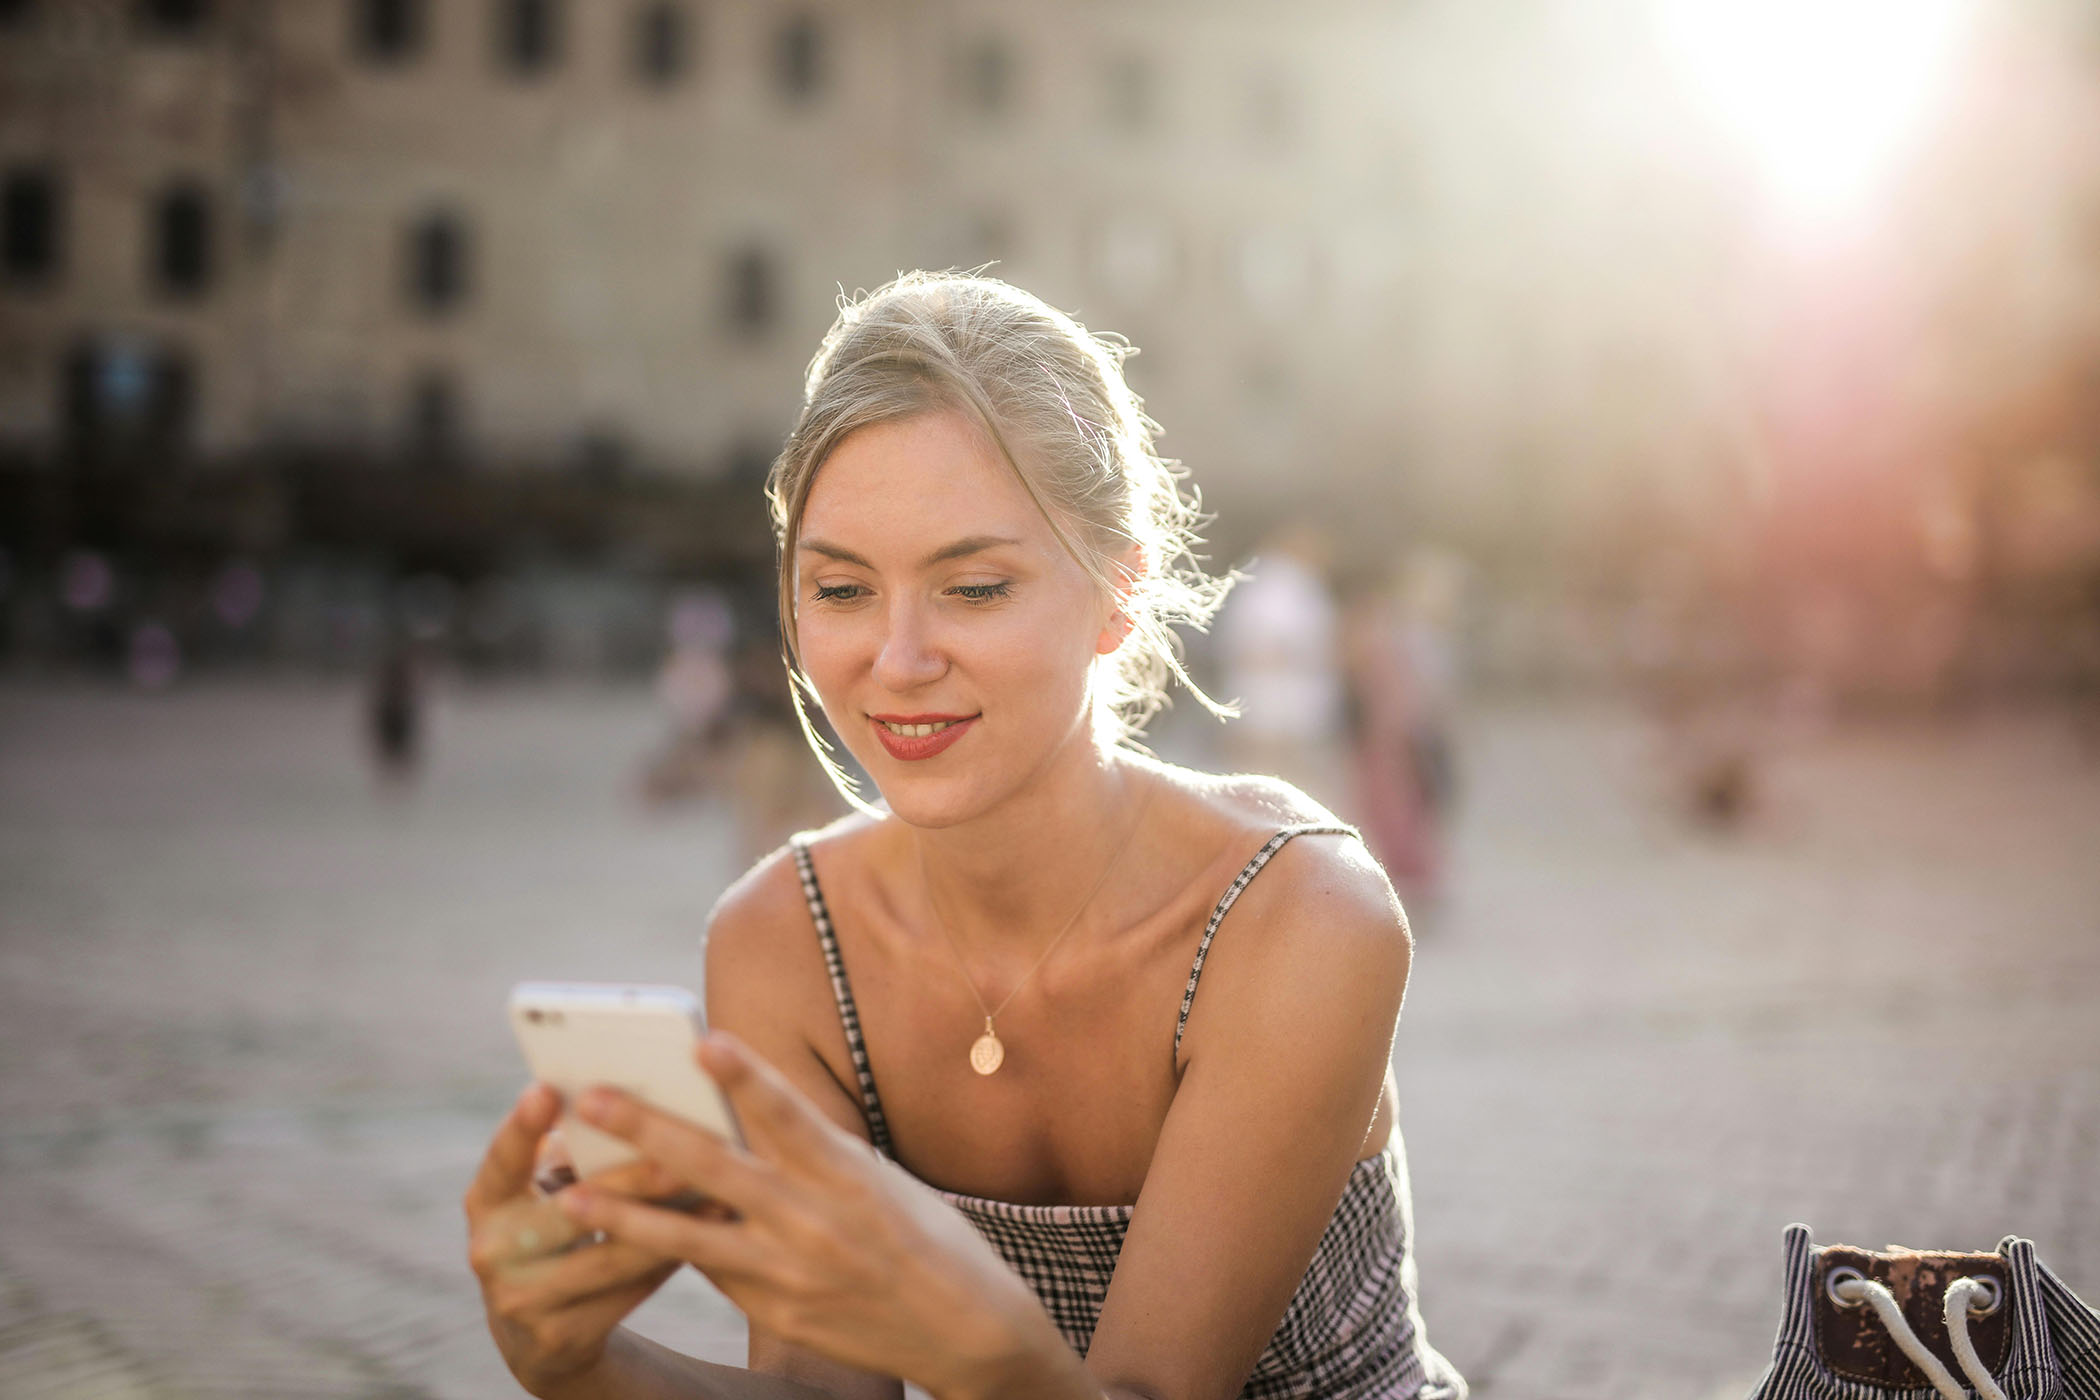 Woman sitting outside looking at phone